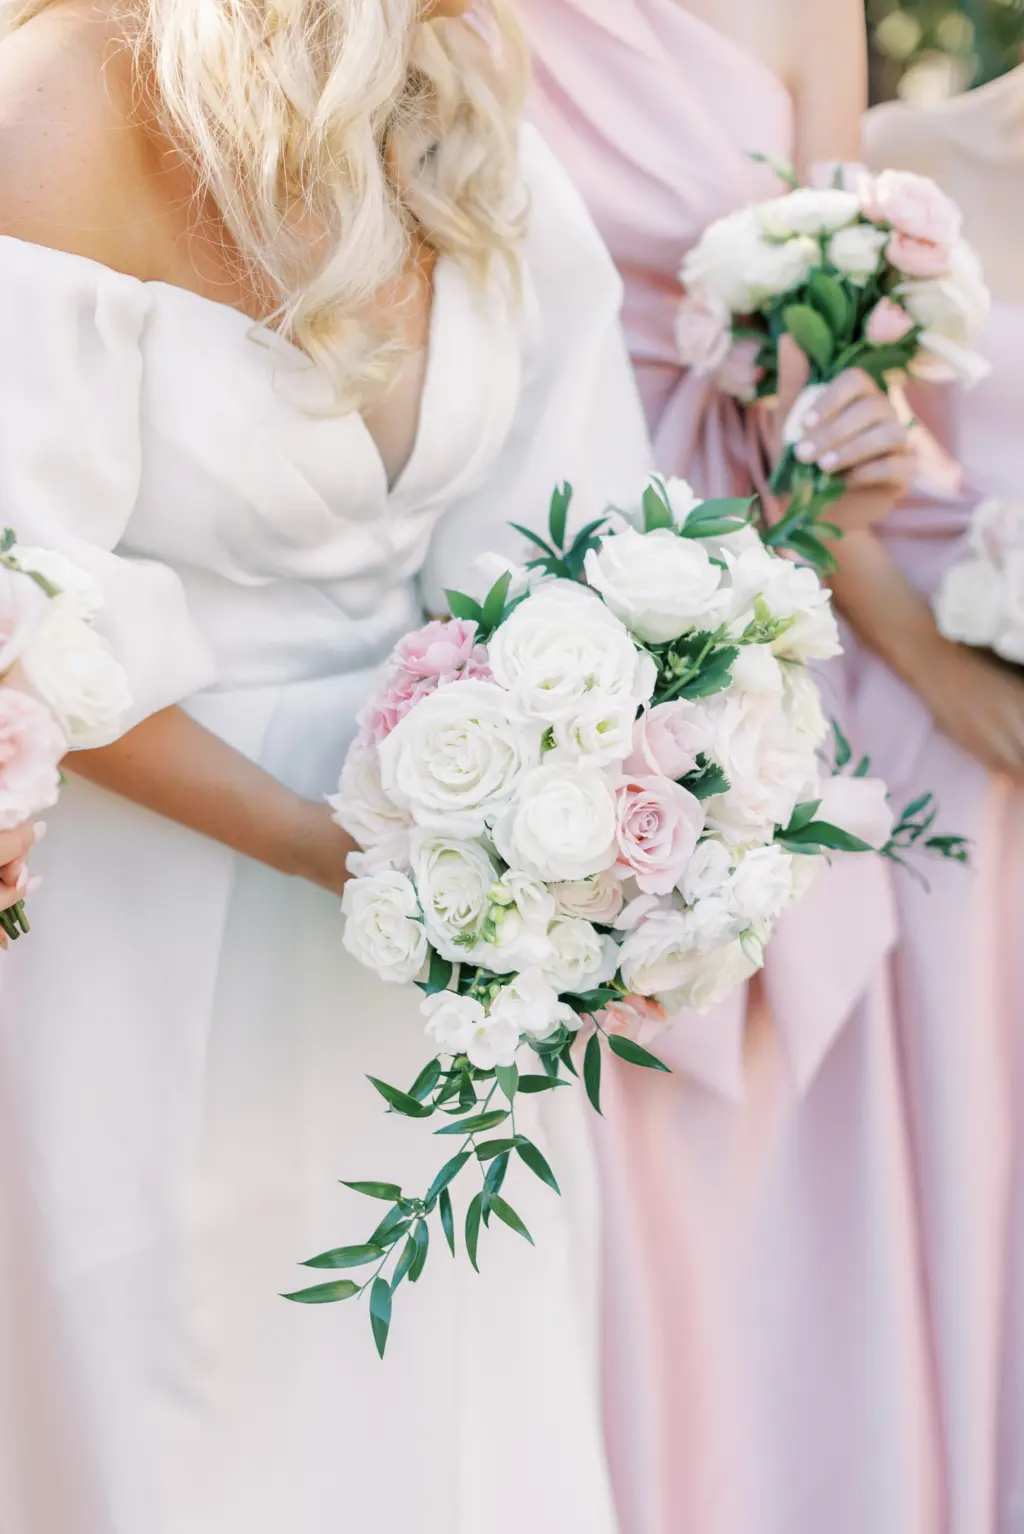 Bridal Bouquet with White and Pink Roses, and Greenery St Petersburg Wedding Florist Bruce Wayne Florals